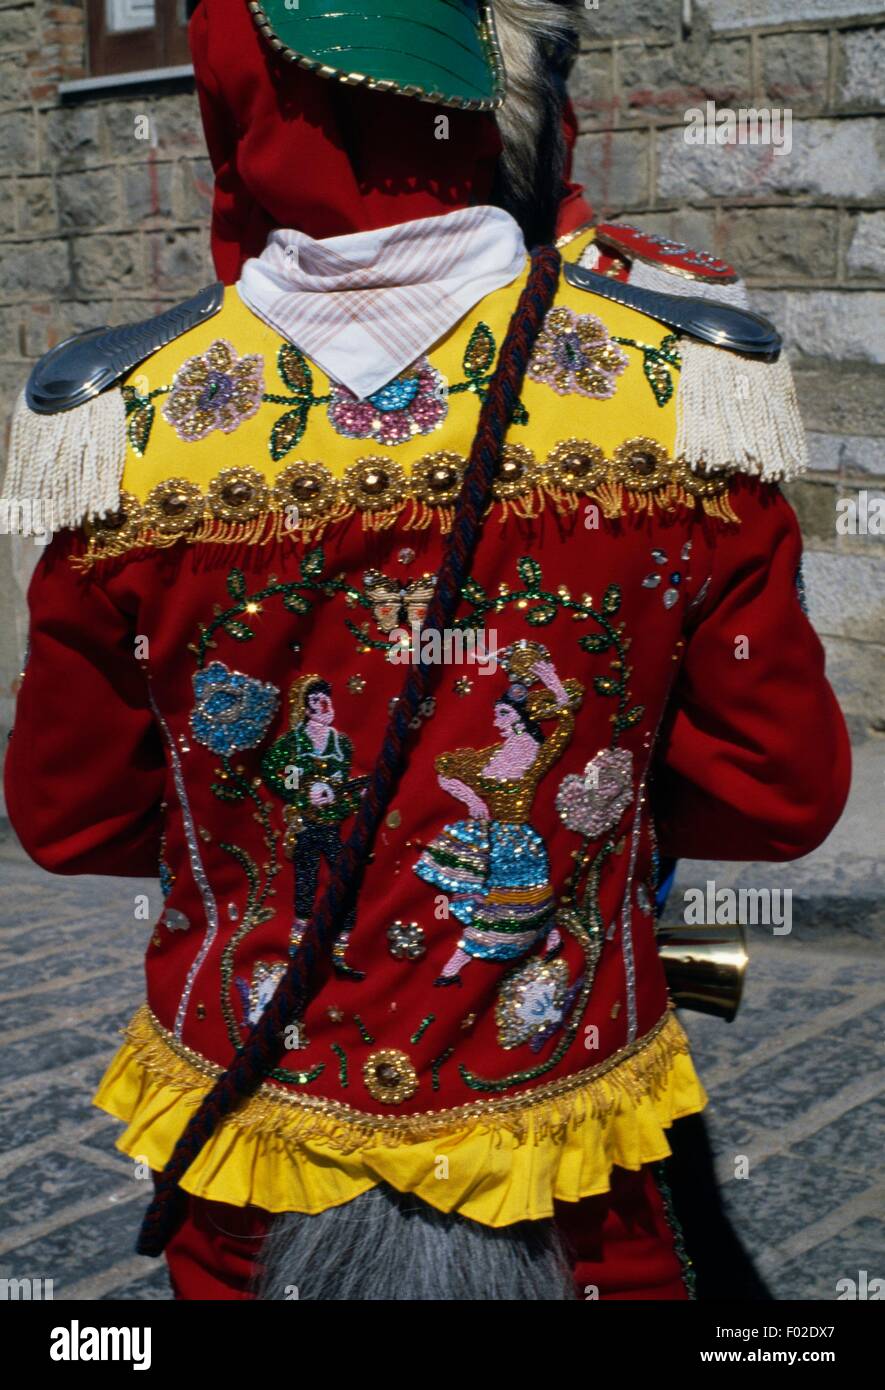 Traditional costumes worn during the Feast of the Jews celebrated during Holy Week in Sanfratello, Sicily, Italy. Stock Photo